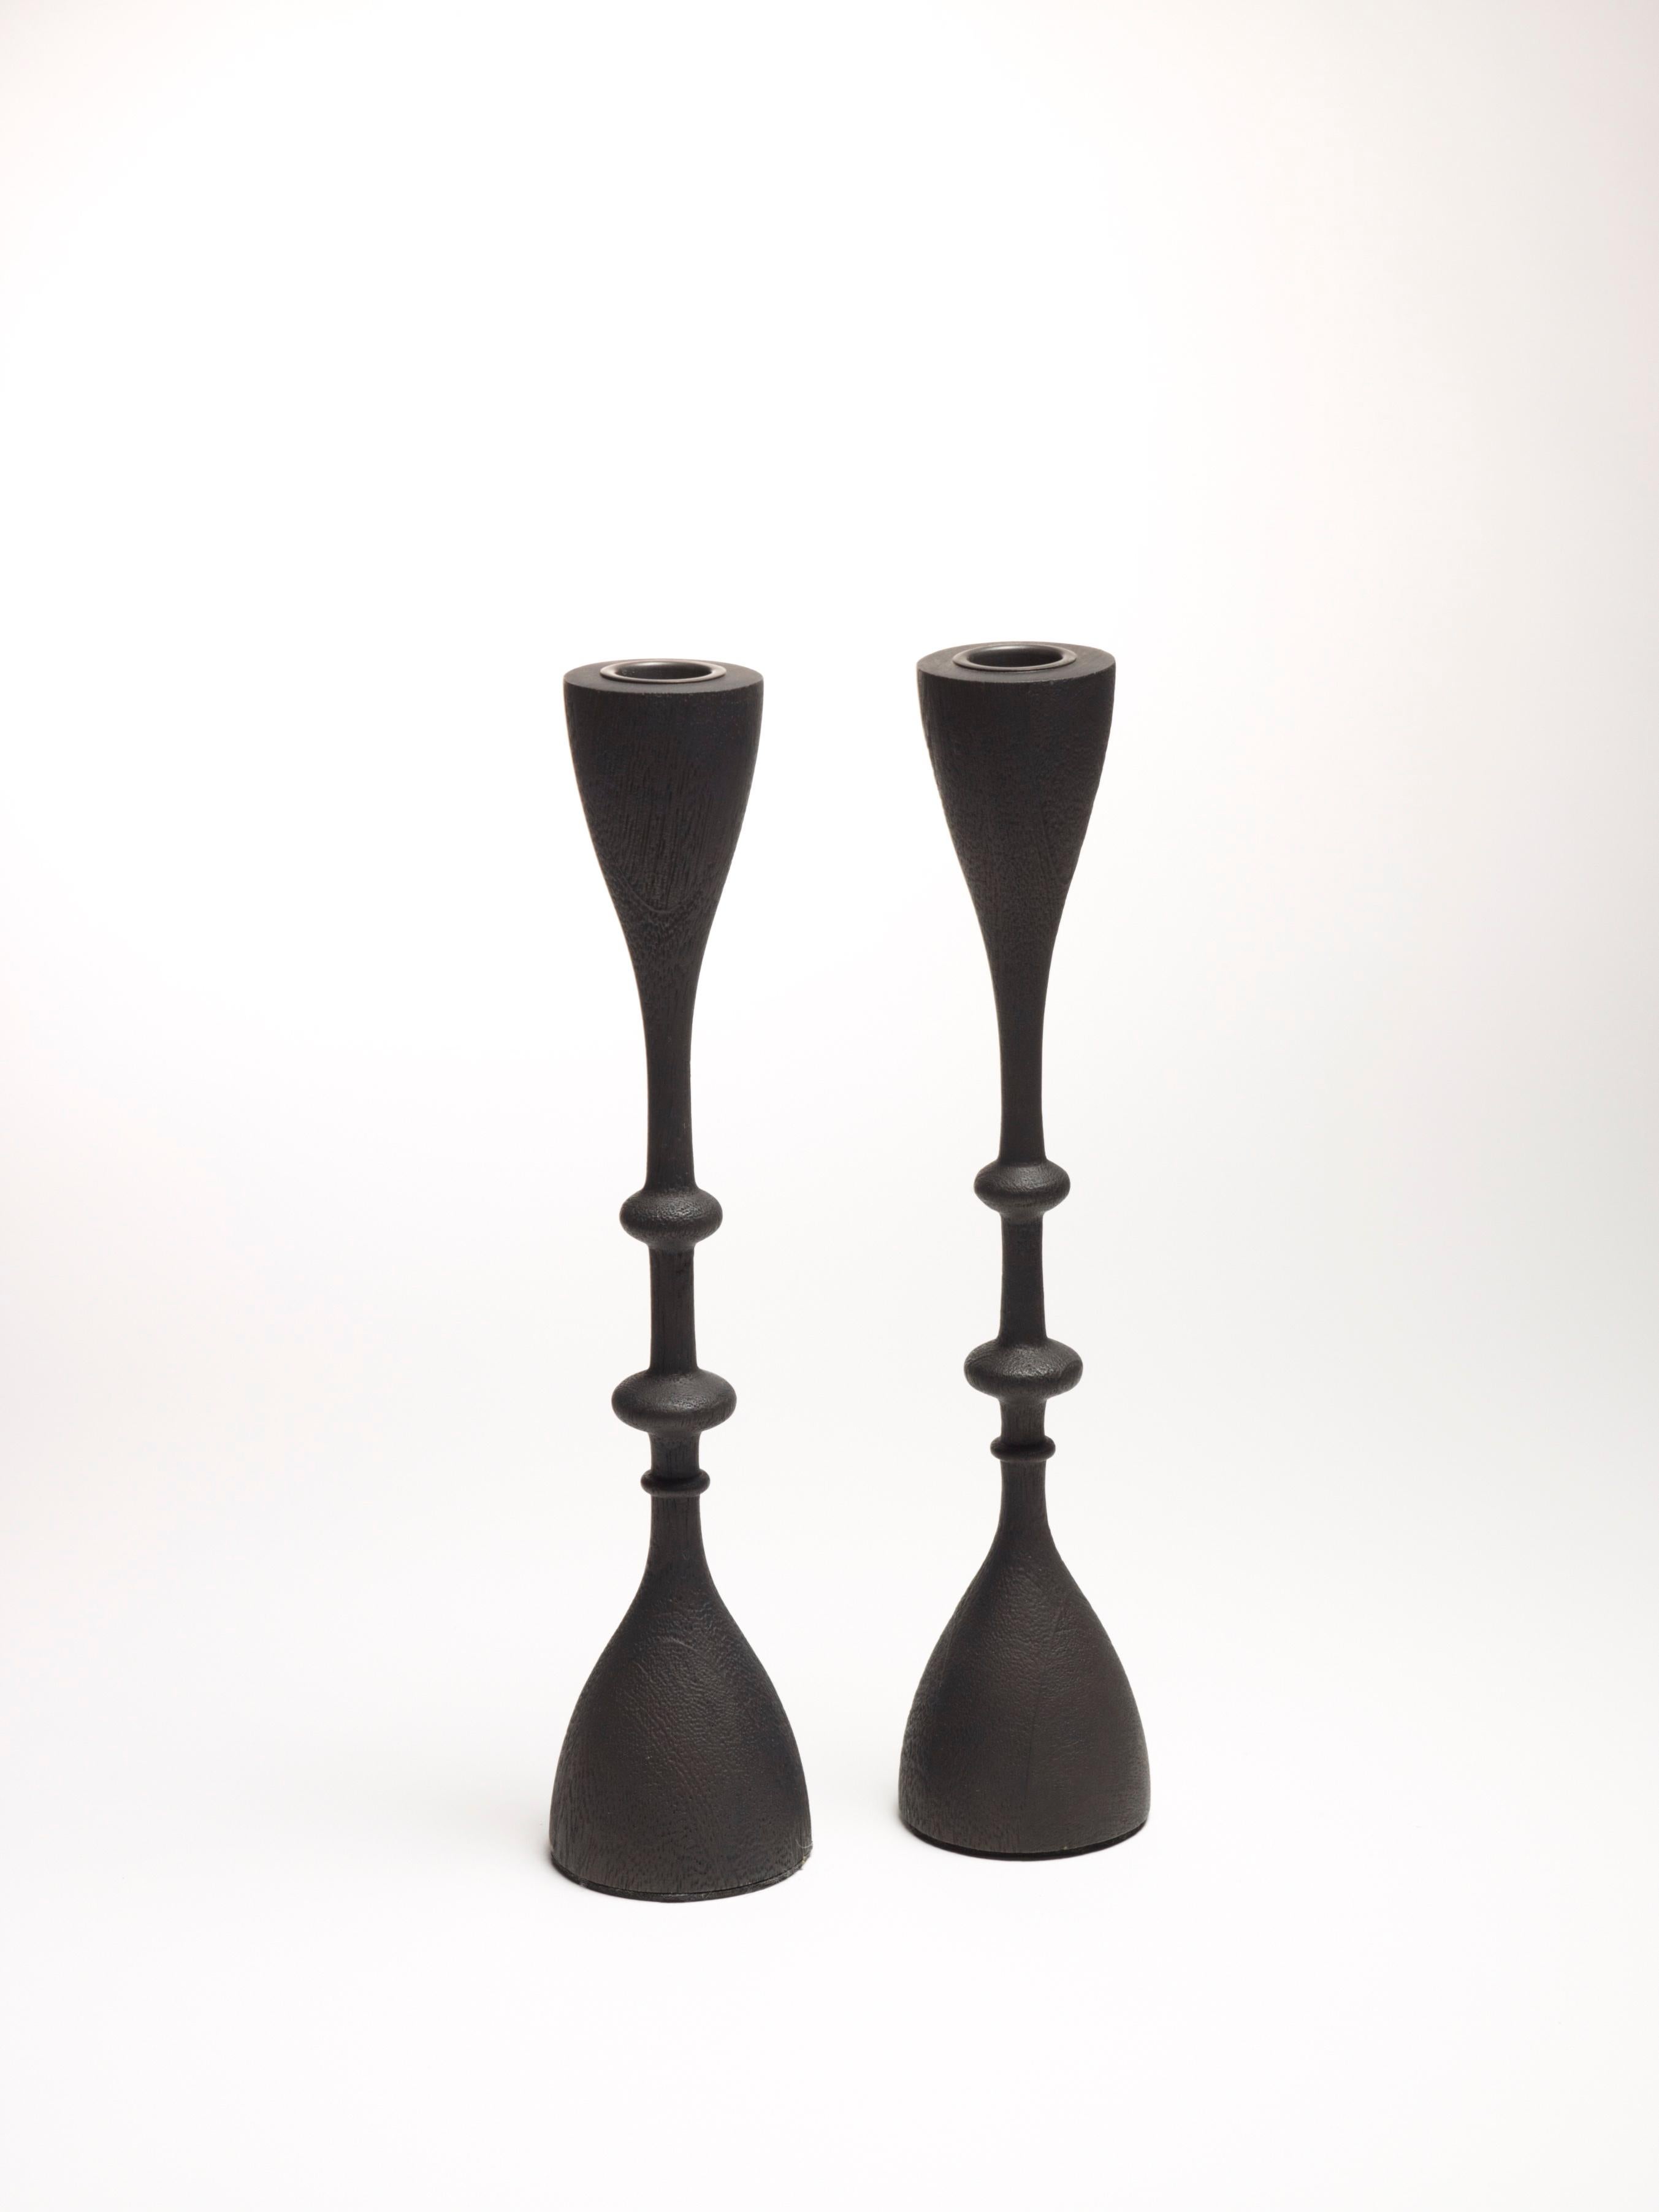 Wave Candlestick (single candlestick, large, blackened) For Sale 8